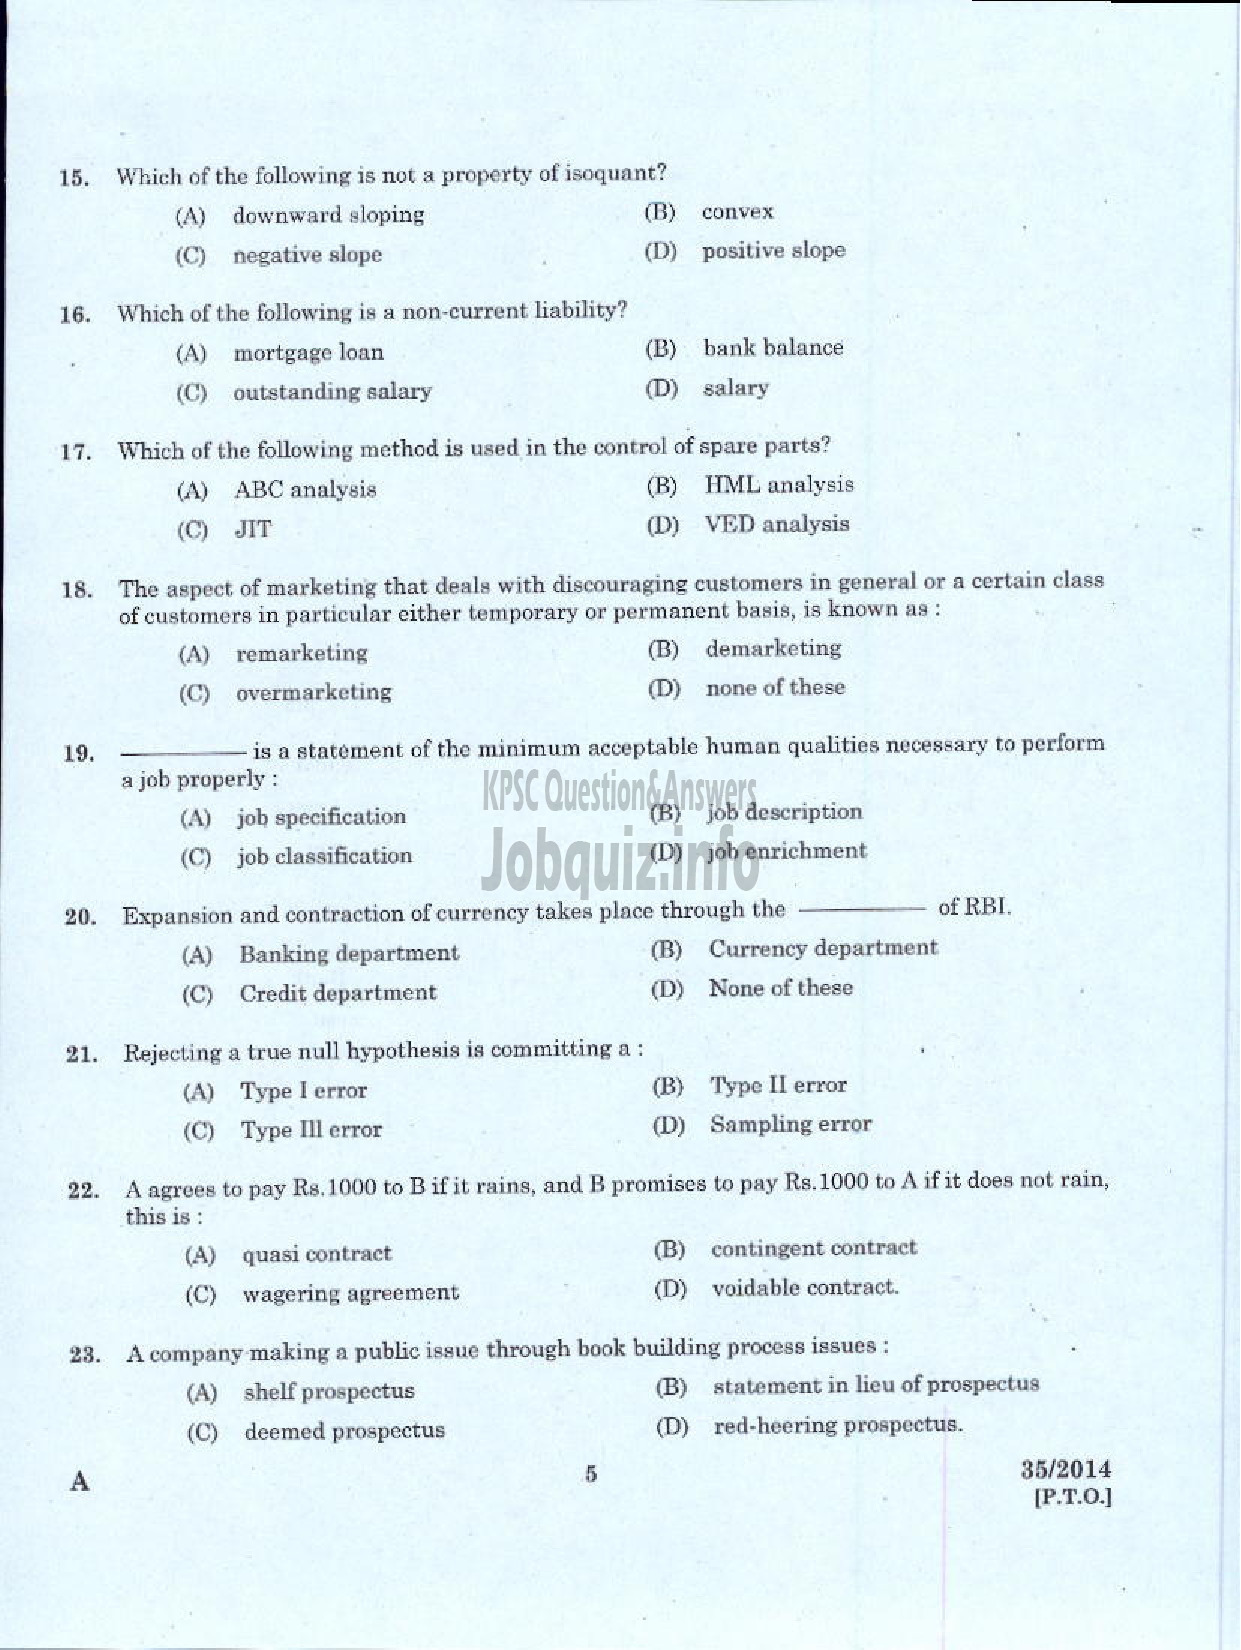 Kerala PSC Question Paper - JUNIOR ASSISTANT ACCOUNTS SR FOR ST ONLY TRAVANCORE COCHIN CHEMICALS LIMITED-3